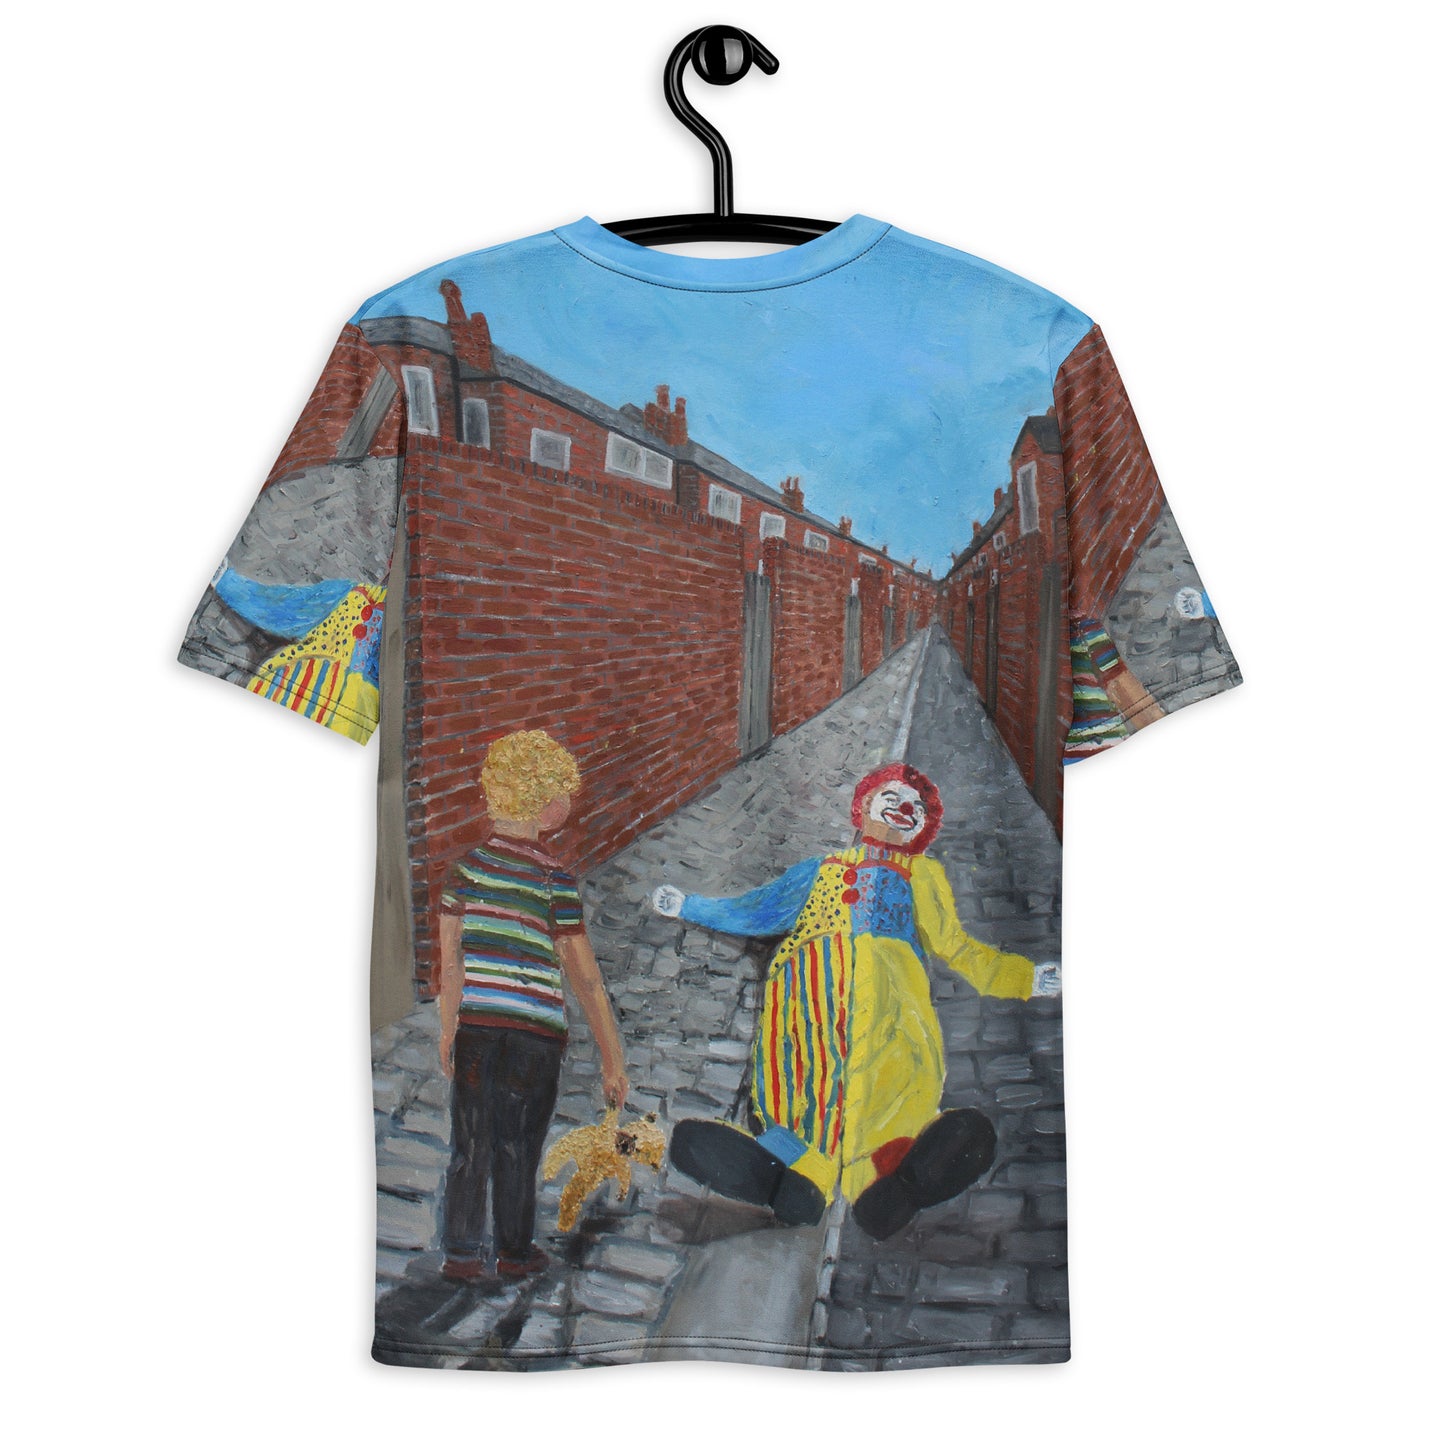 There's a Clown in the Entry - unisex t-shirt